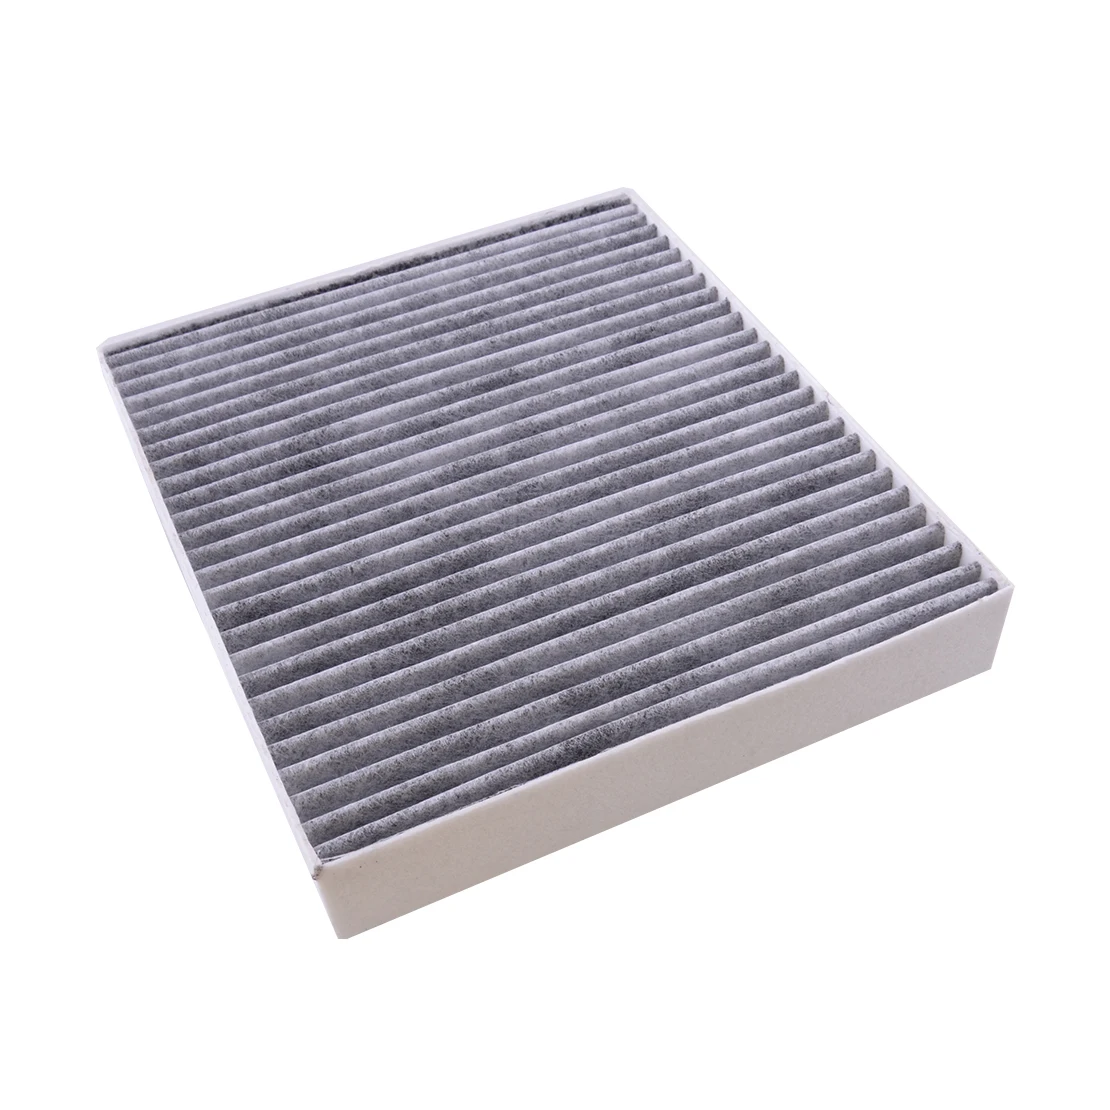 52420930 Activated Carbon Cabin Air Filter 52420930 13271190 13271191 Fit for Buick Cadillac Saab Chevrolet Cruze Malibu Sonic